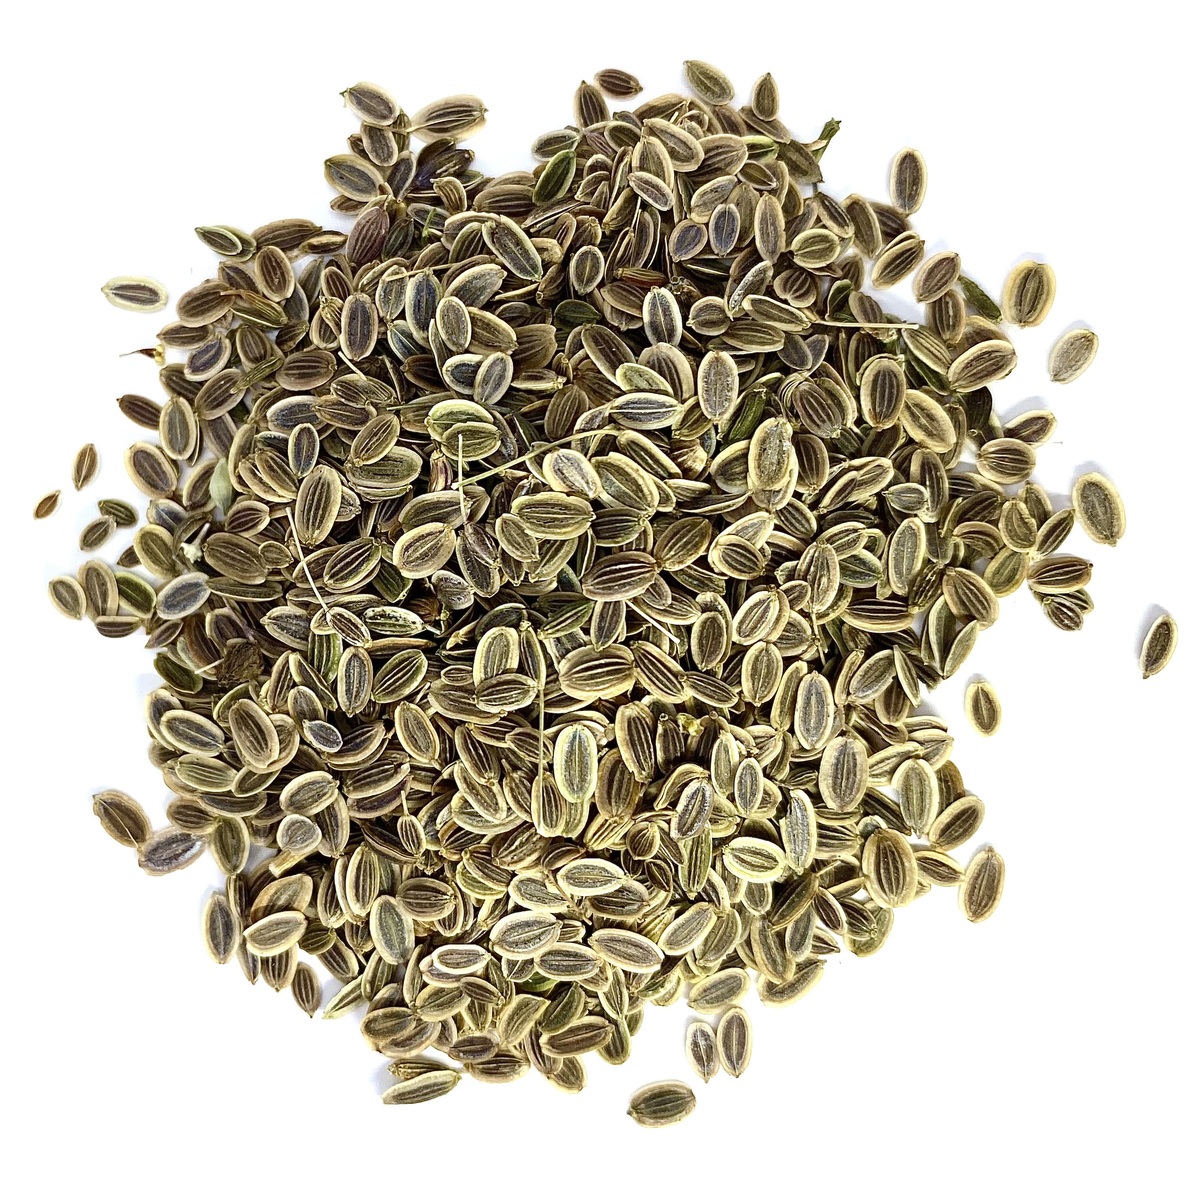 Dill Seeds